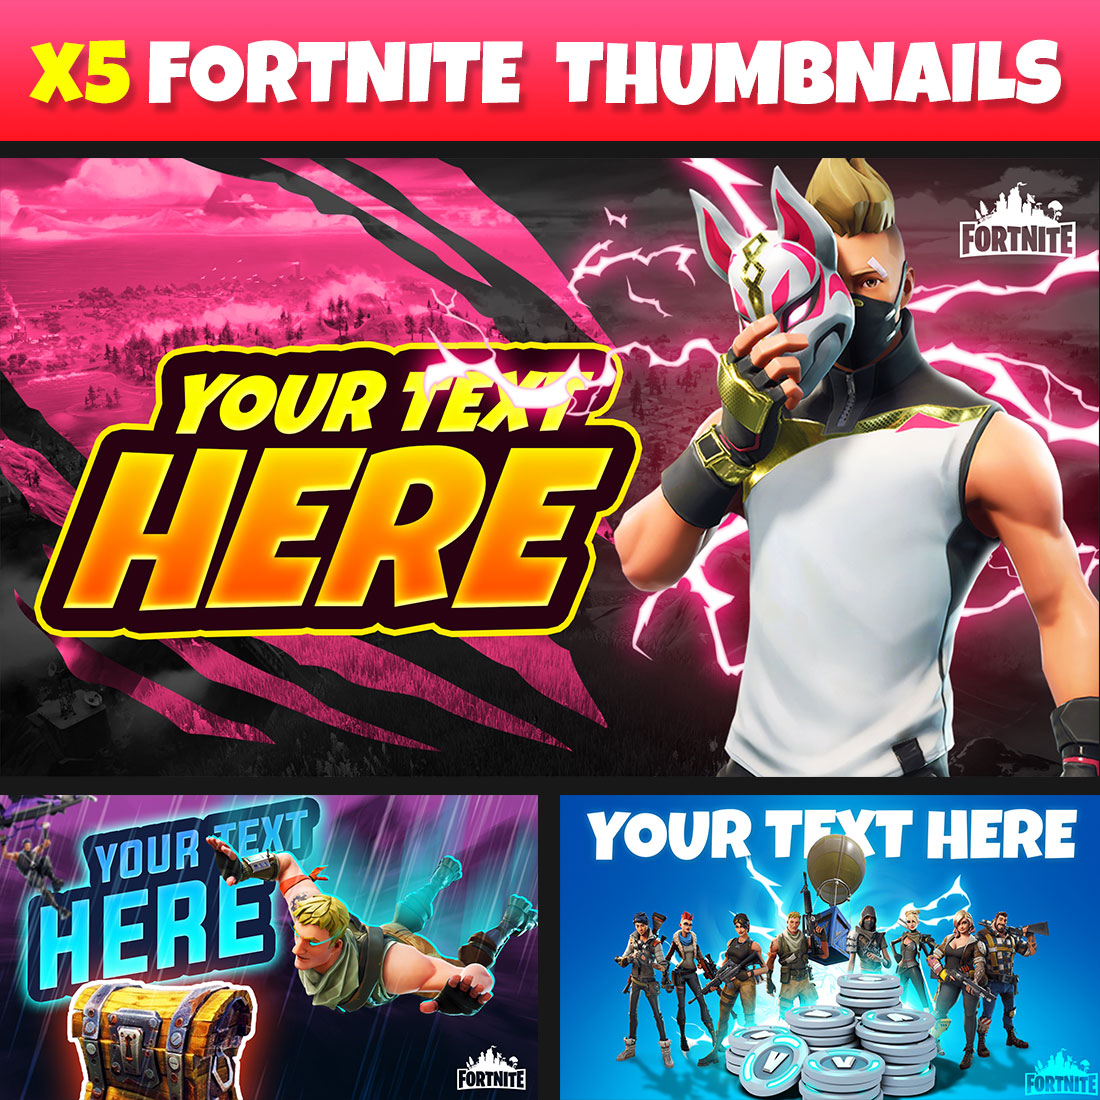 x5 Fortnite Gaming Thumbnails Templates cover image.